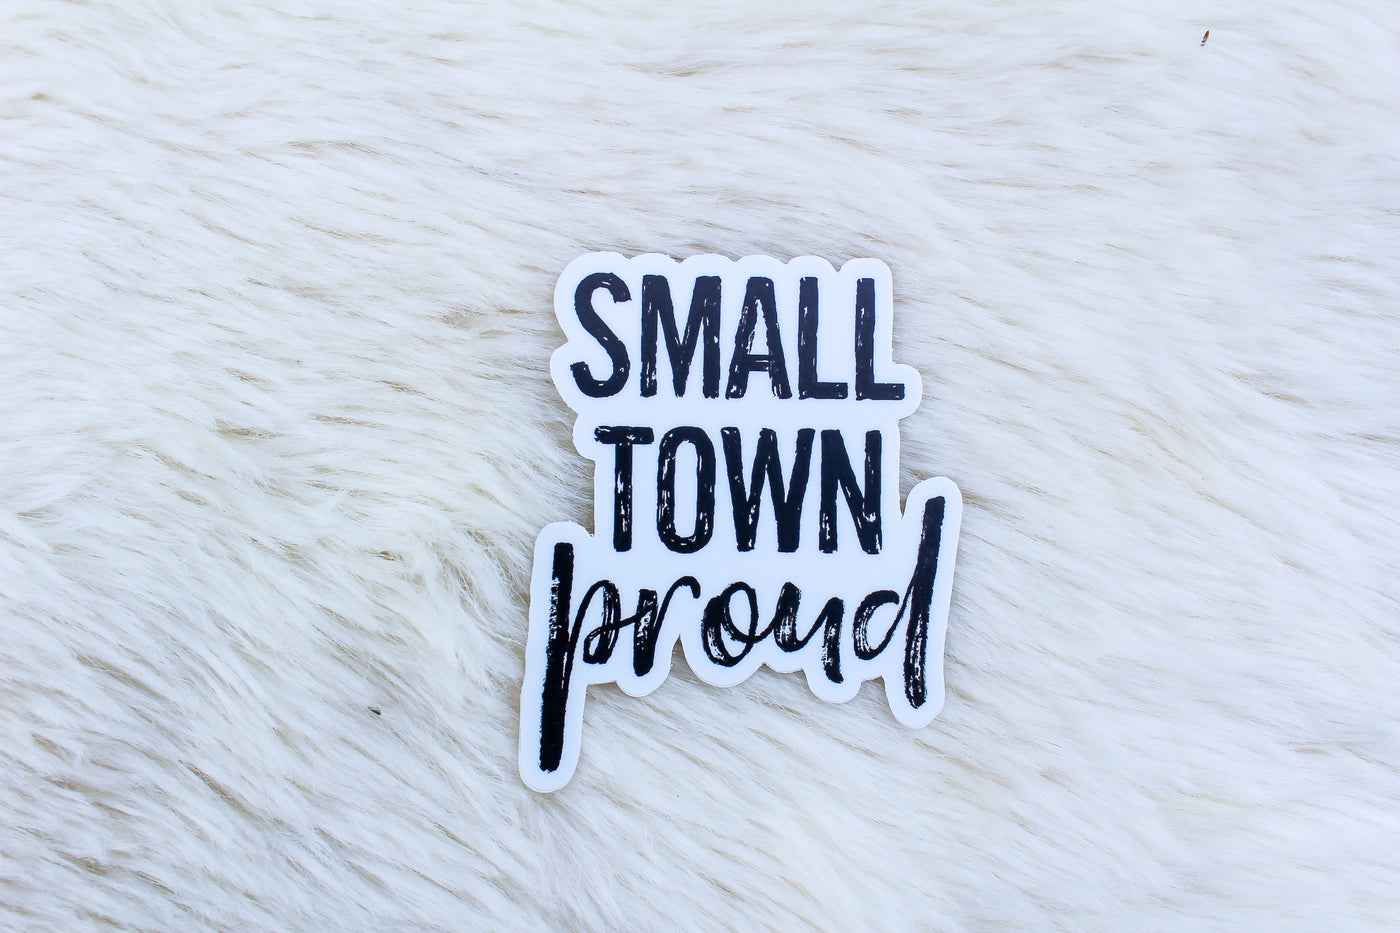 Small Town Proud - Sticker